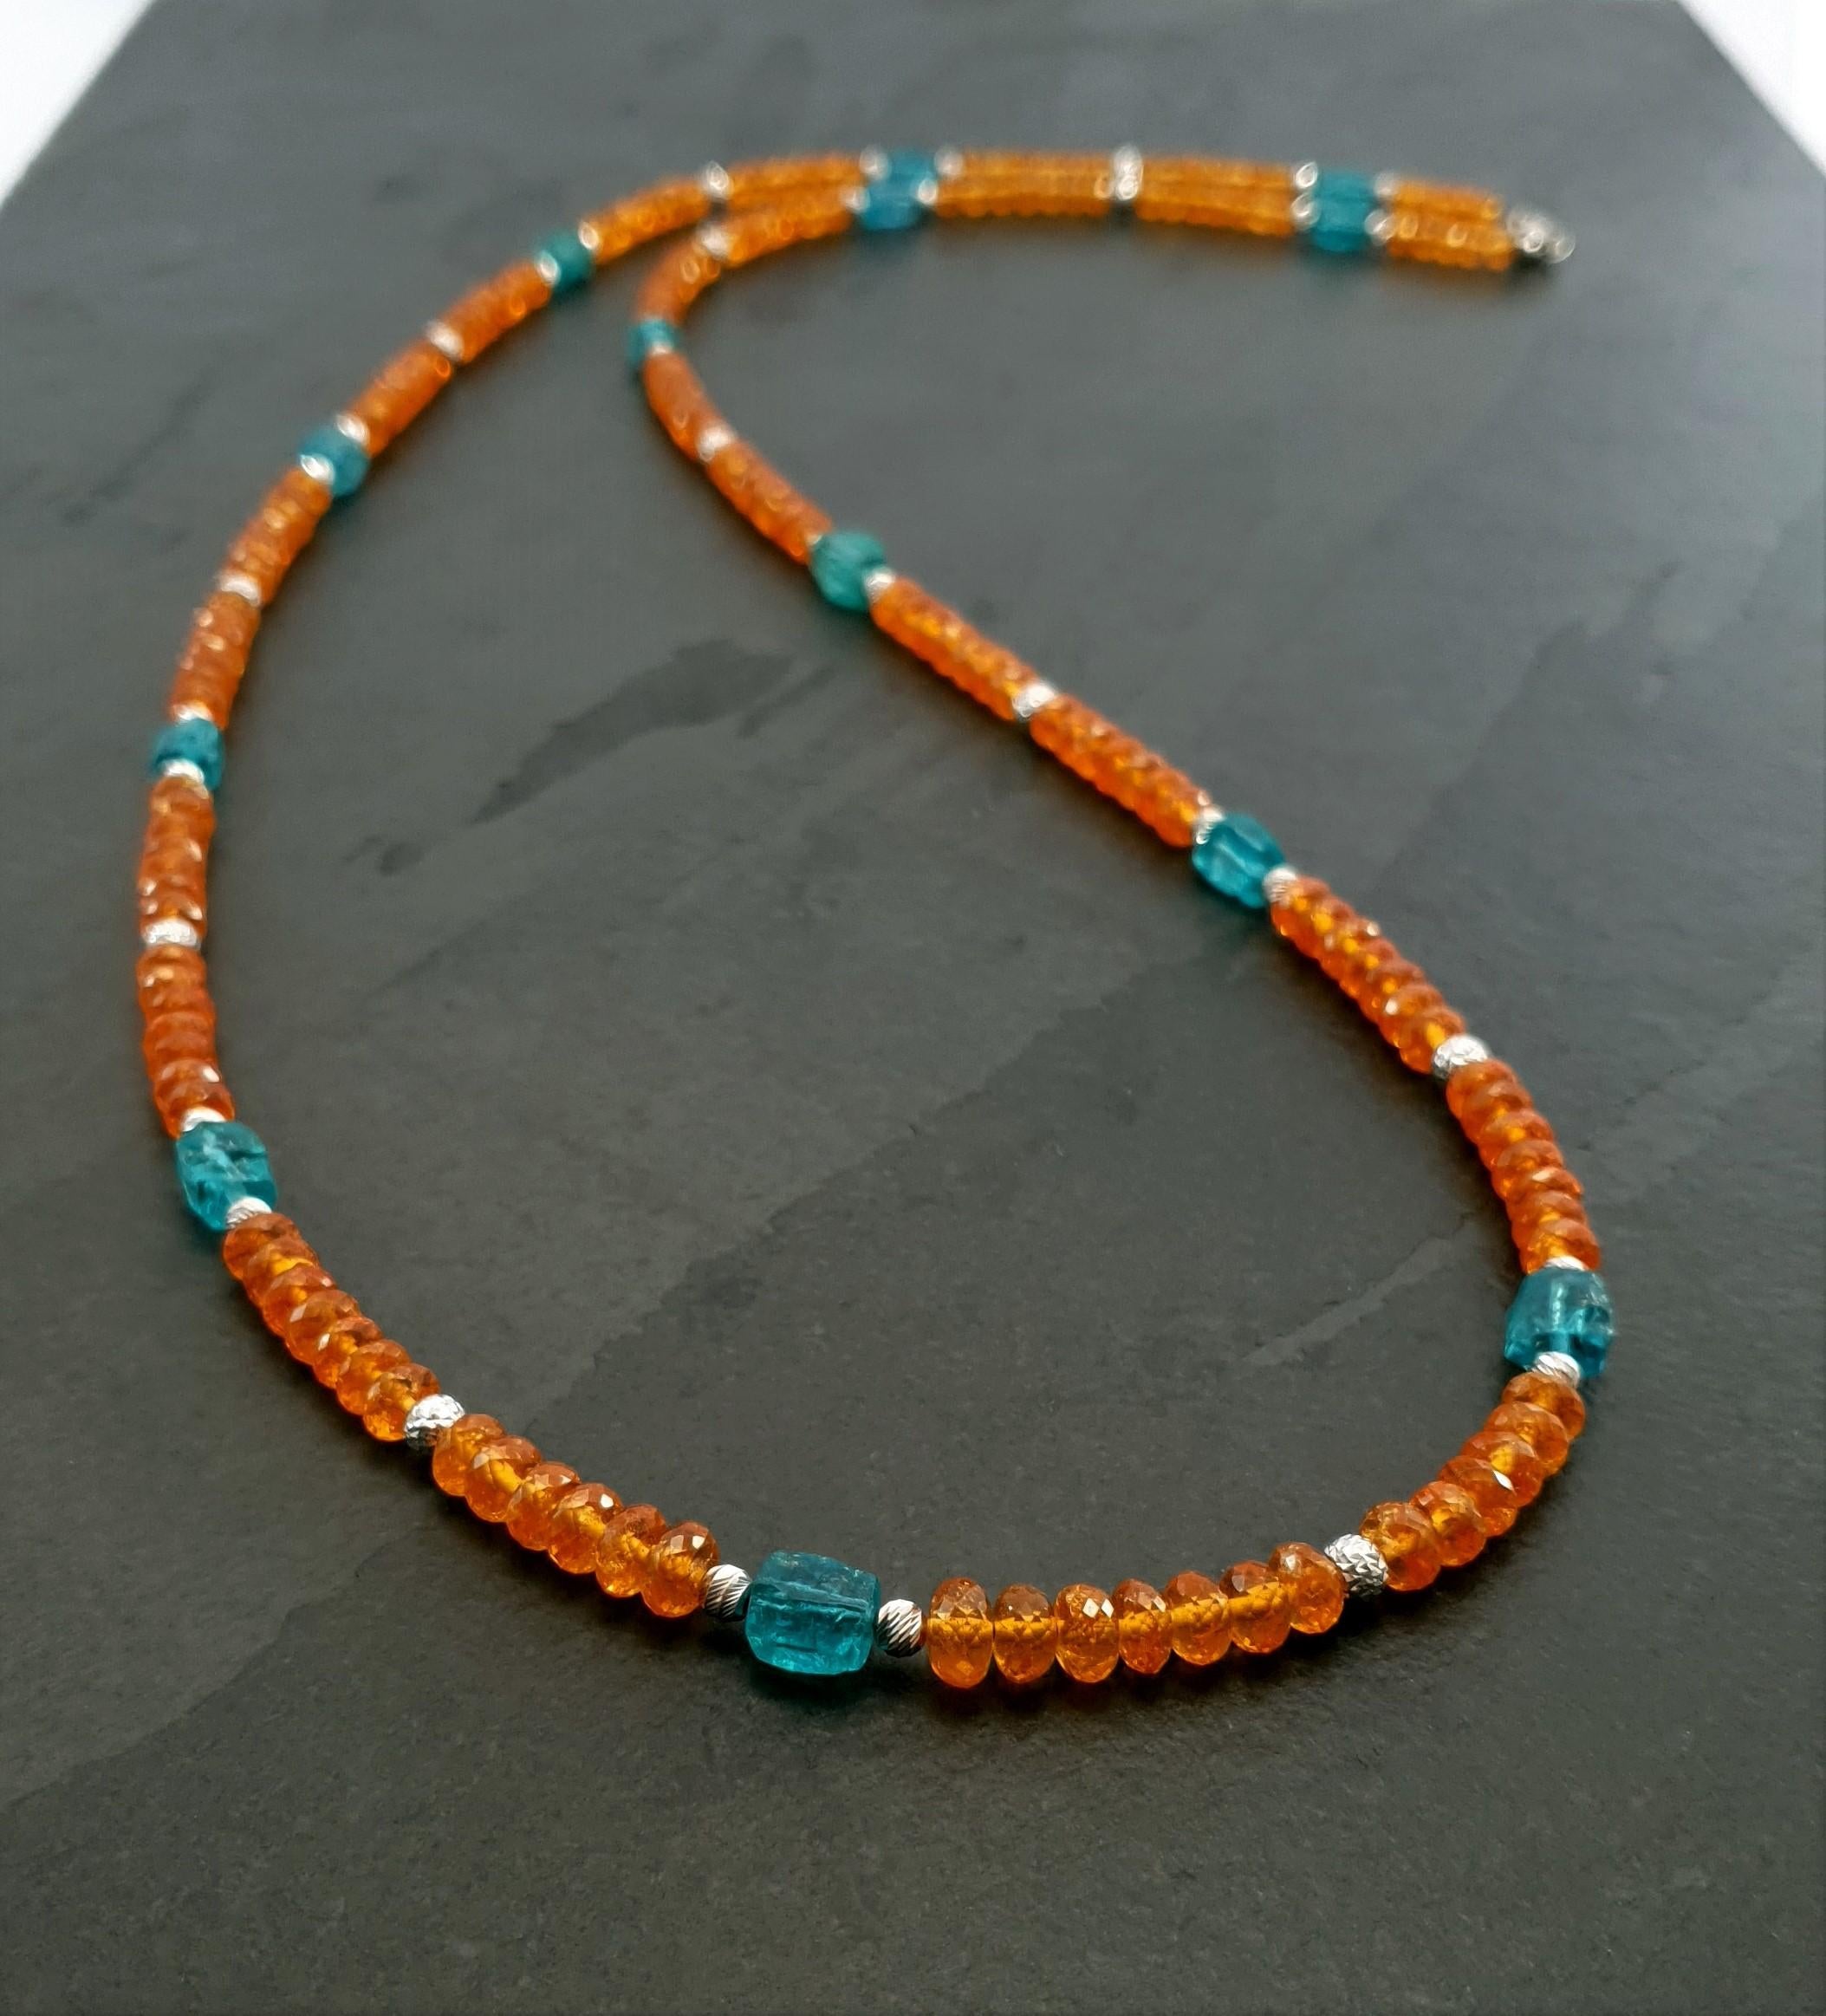 Orange Garnets and Paraiba Color Apatite Beads Necklace with 18 Carat White Gold 2